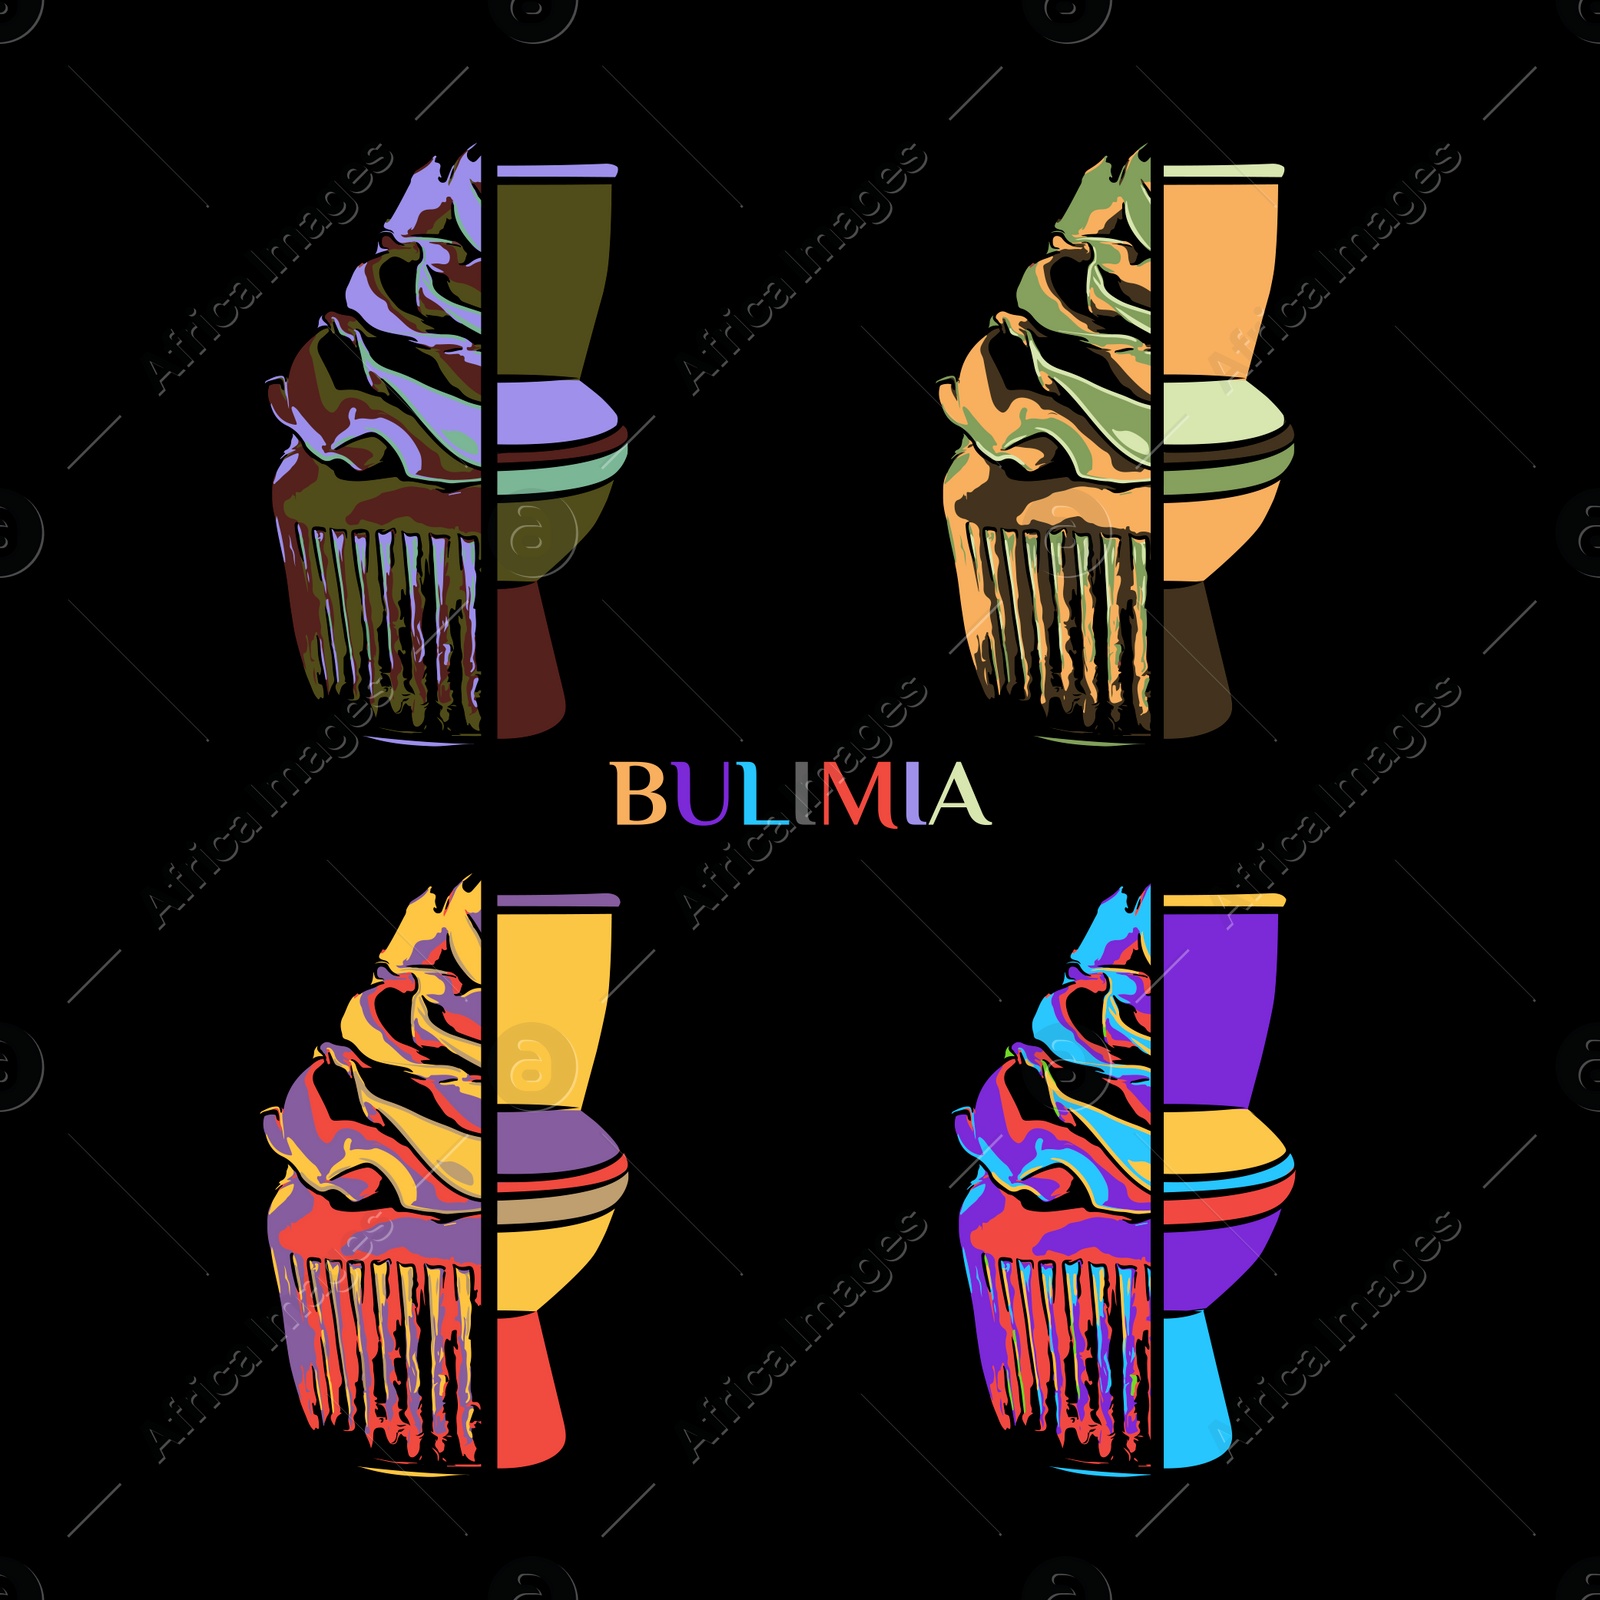 Illustration of Bulimia - eating disorder. Collage with illustrations of cupcakes and toilet bowls on black background